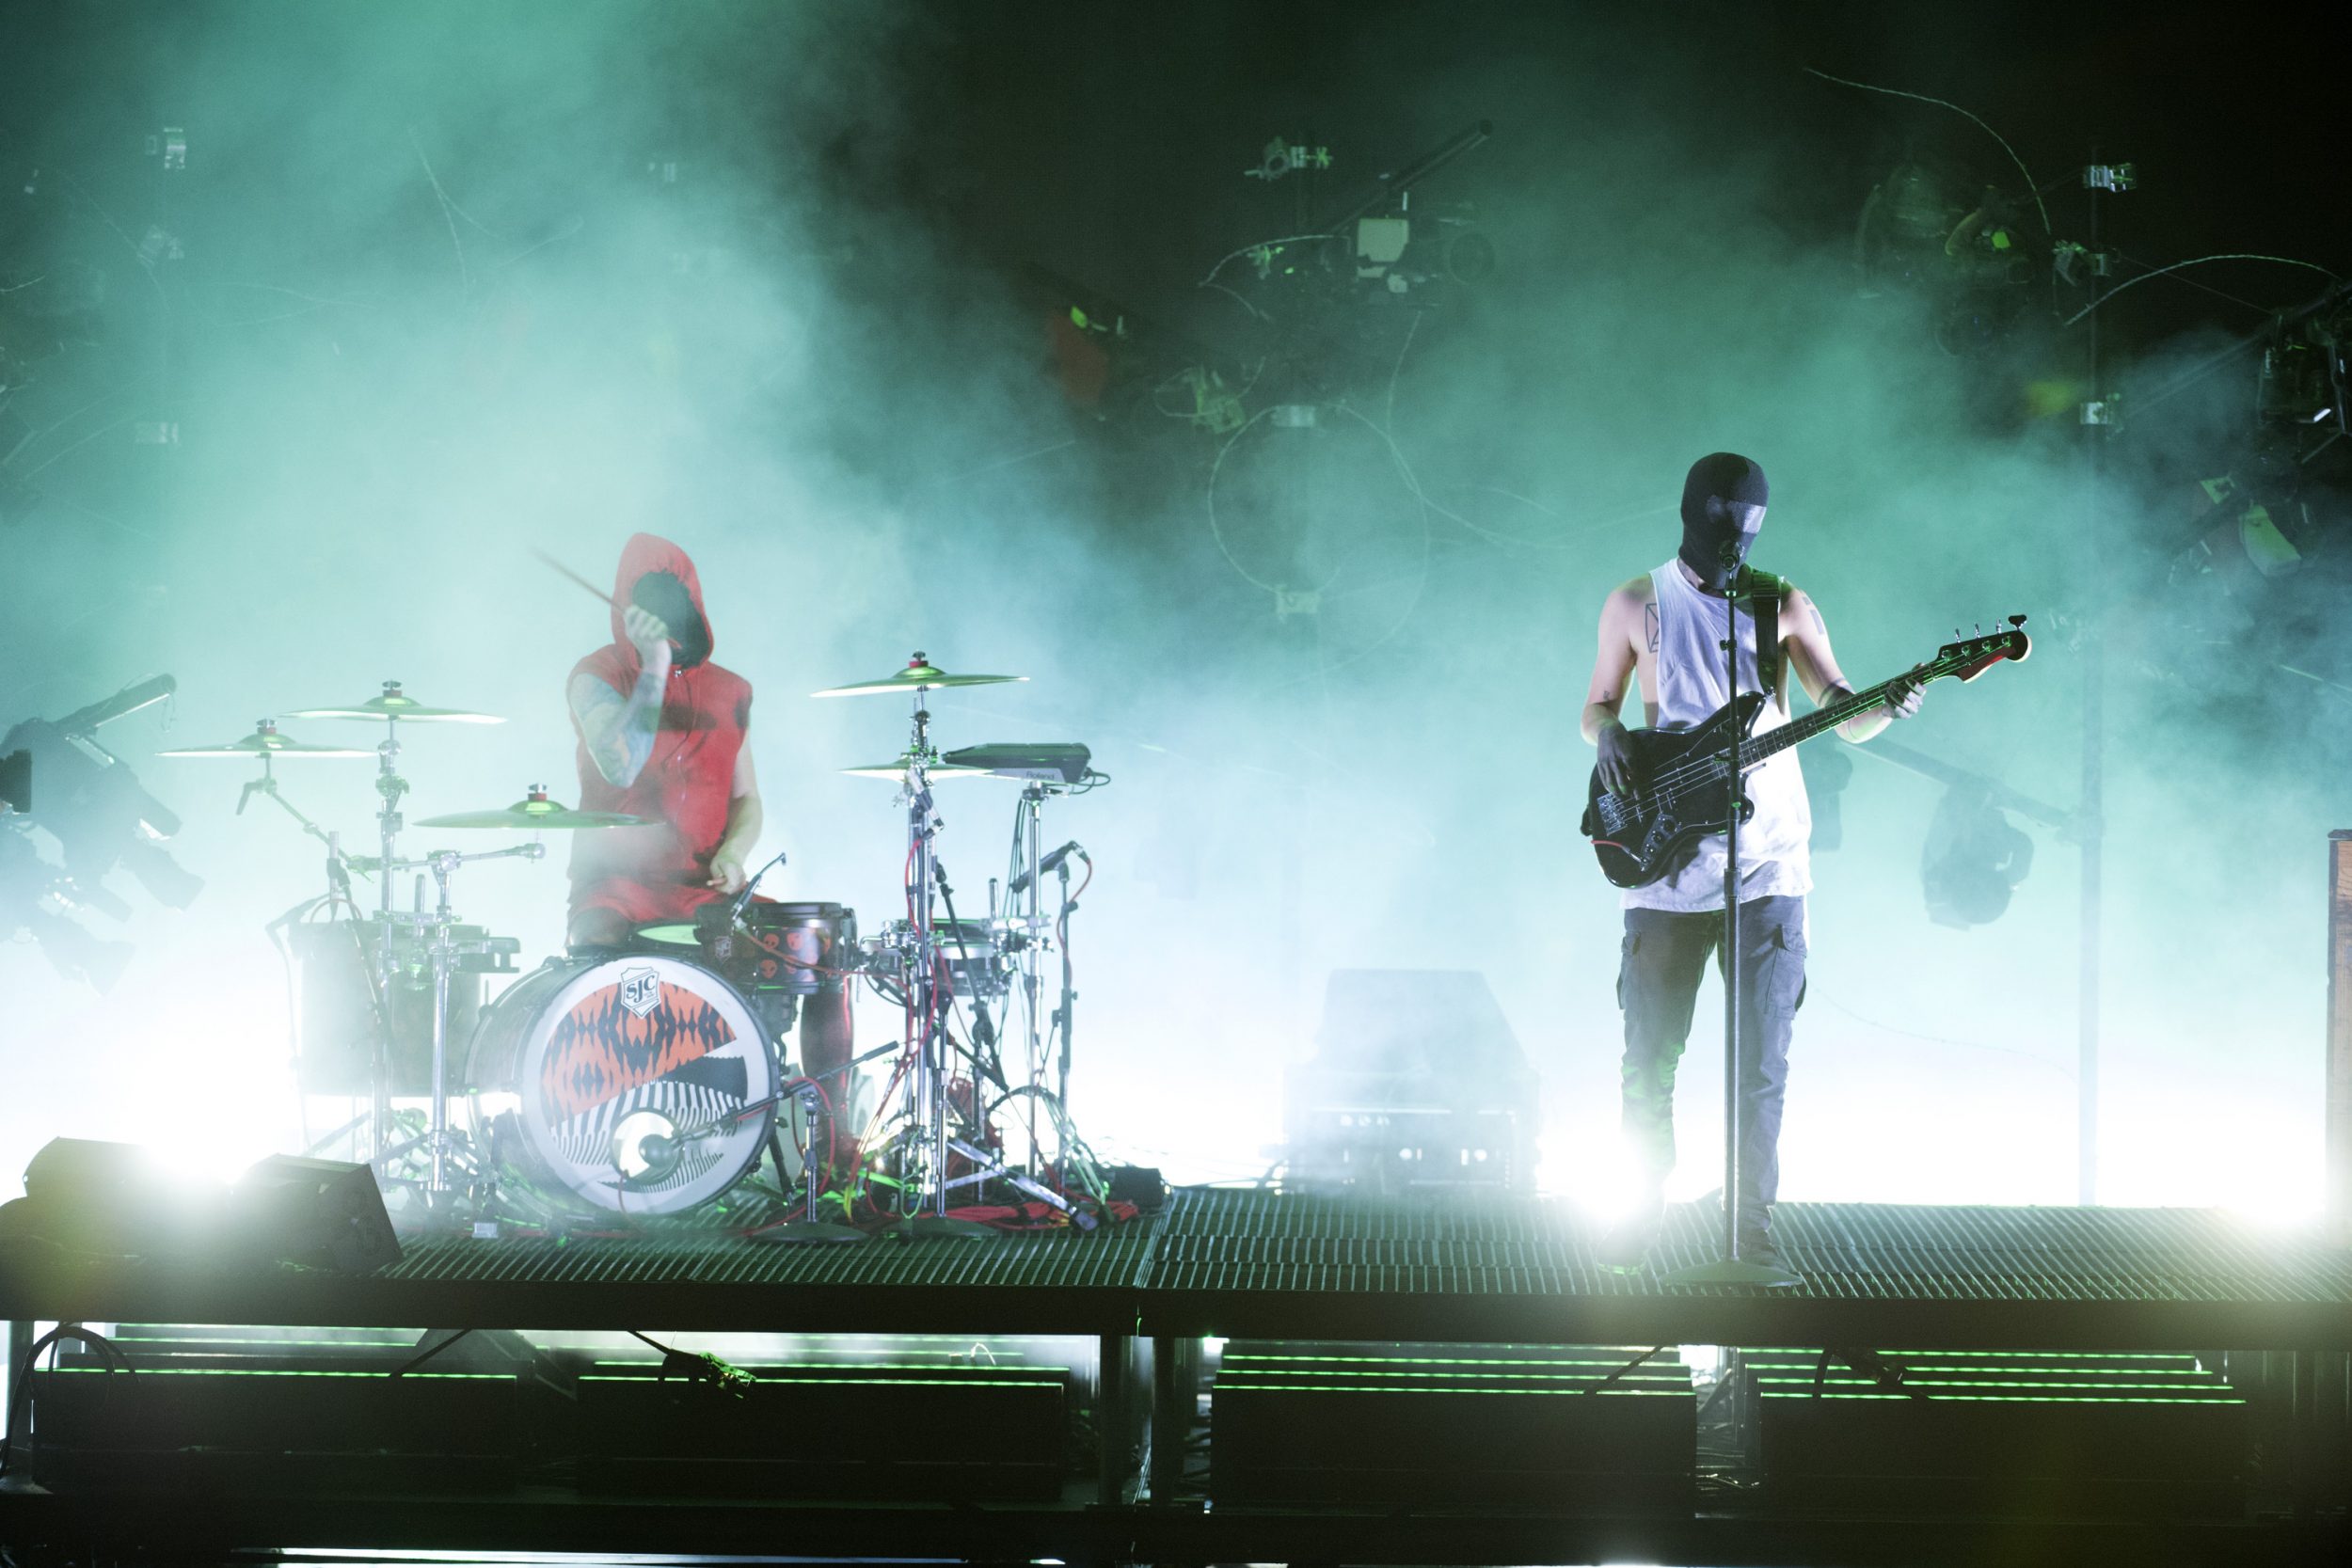 THE 2016 AMERICAN MUSIC AWARDS(r) - The “2016 American Music Awards,” the world’s biggest fan-voted award show, broadcasts live from the Microsoft Theater in Los Angeles on SUNDAY, NOVEMBER 20, at 8:00 p.m. EST, on ABC. (Image Group LA/ABC) TWENTY ONE PILOTS